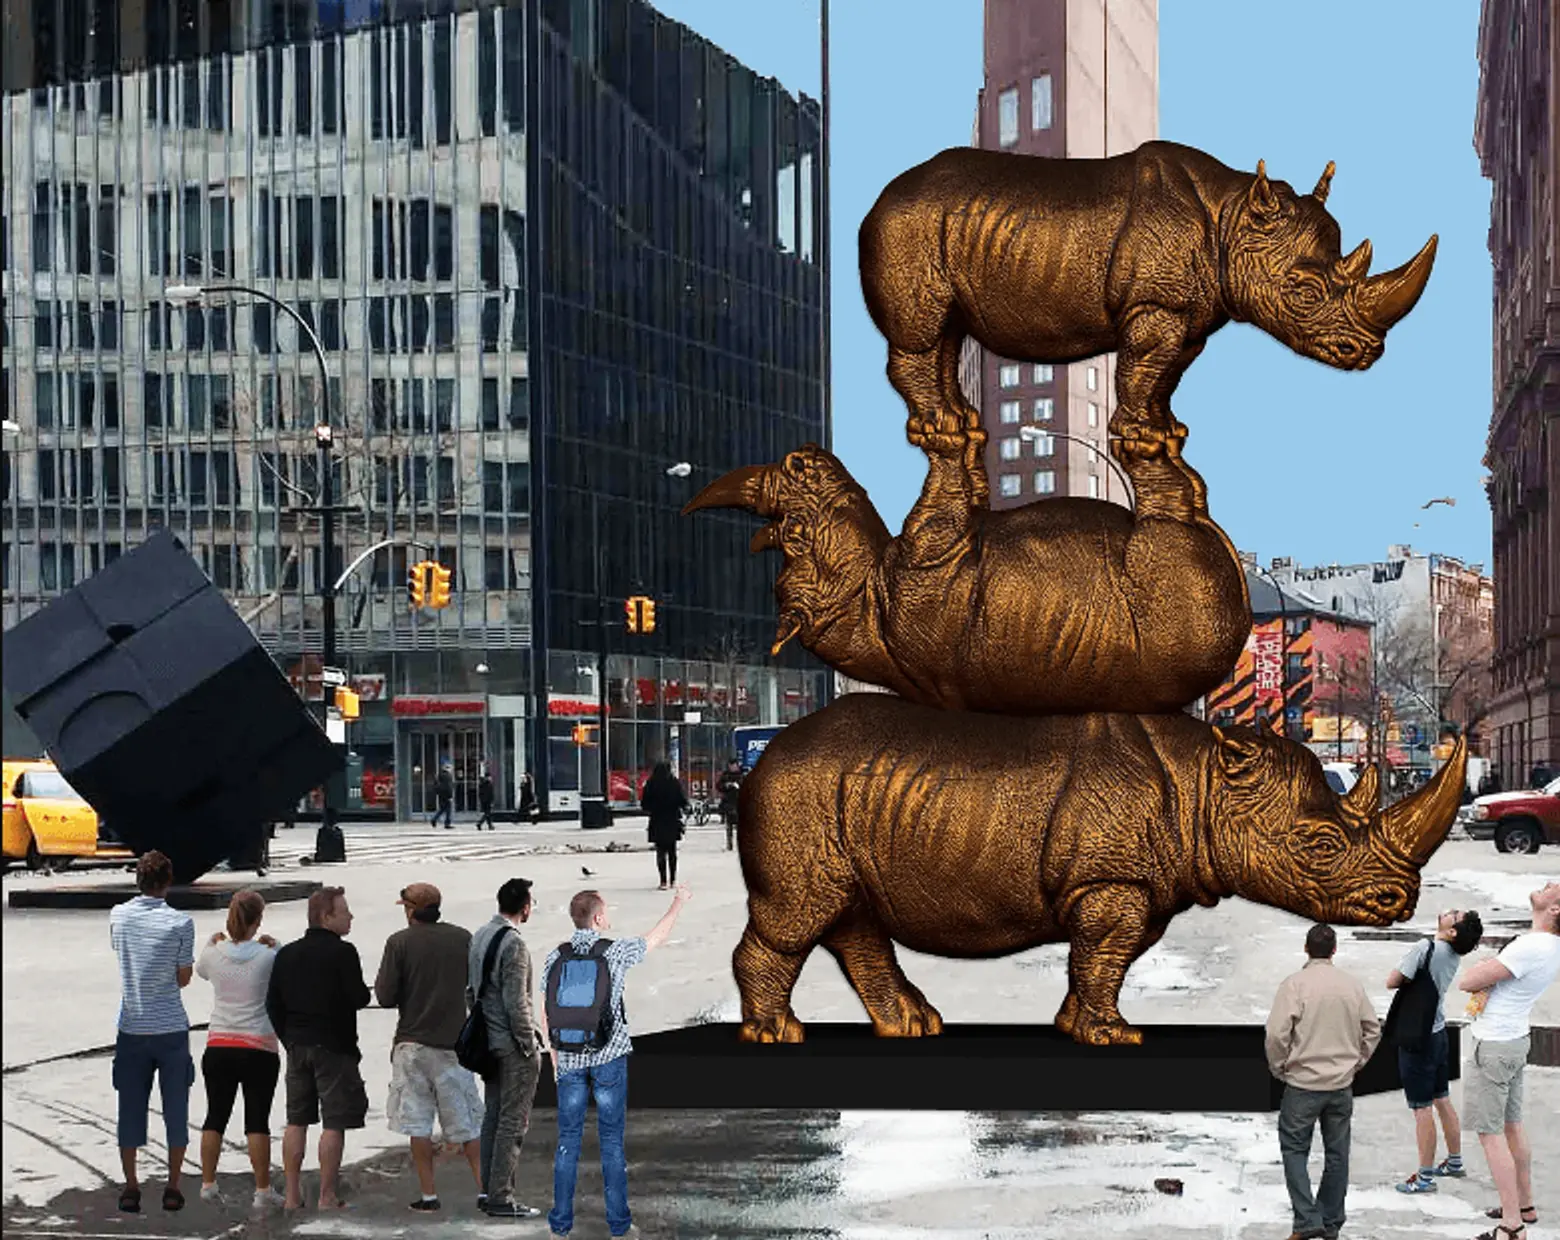 Help bring the world’s largest rhino sculpture to Astor Place